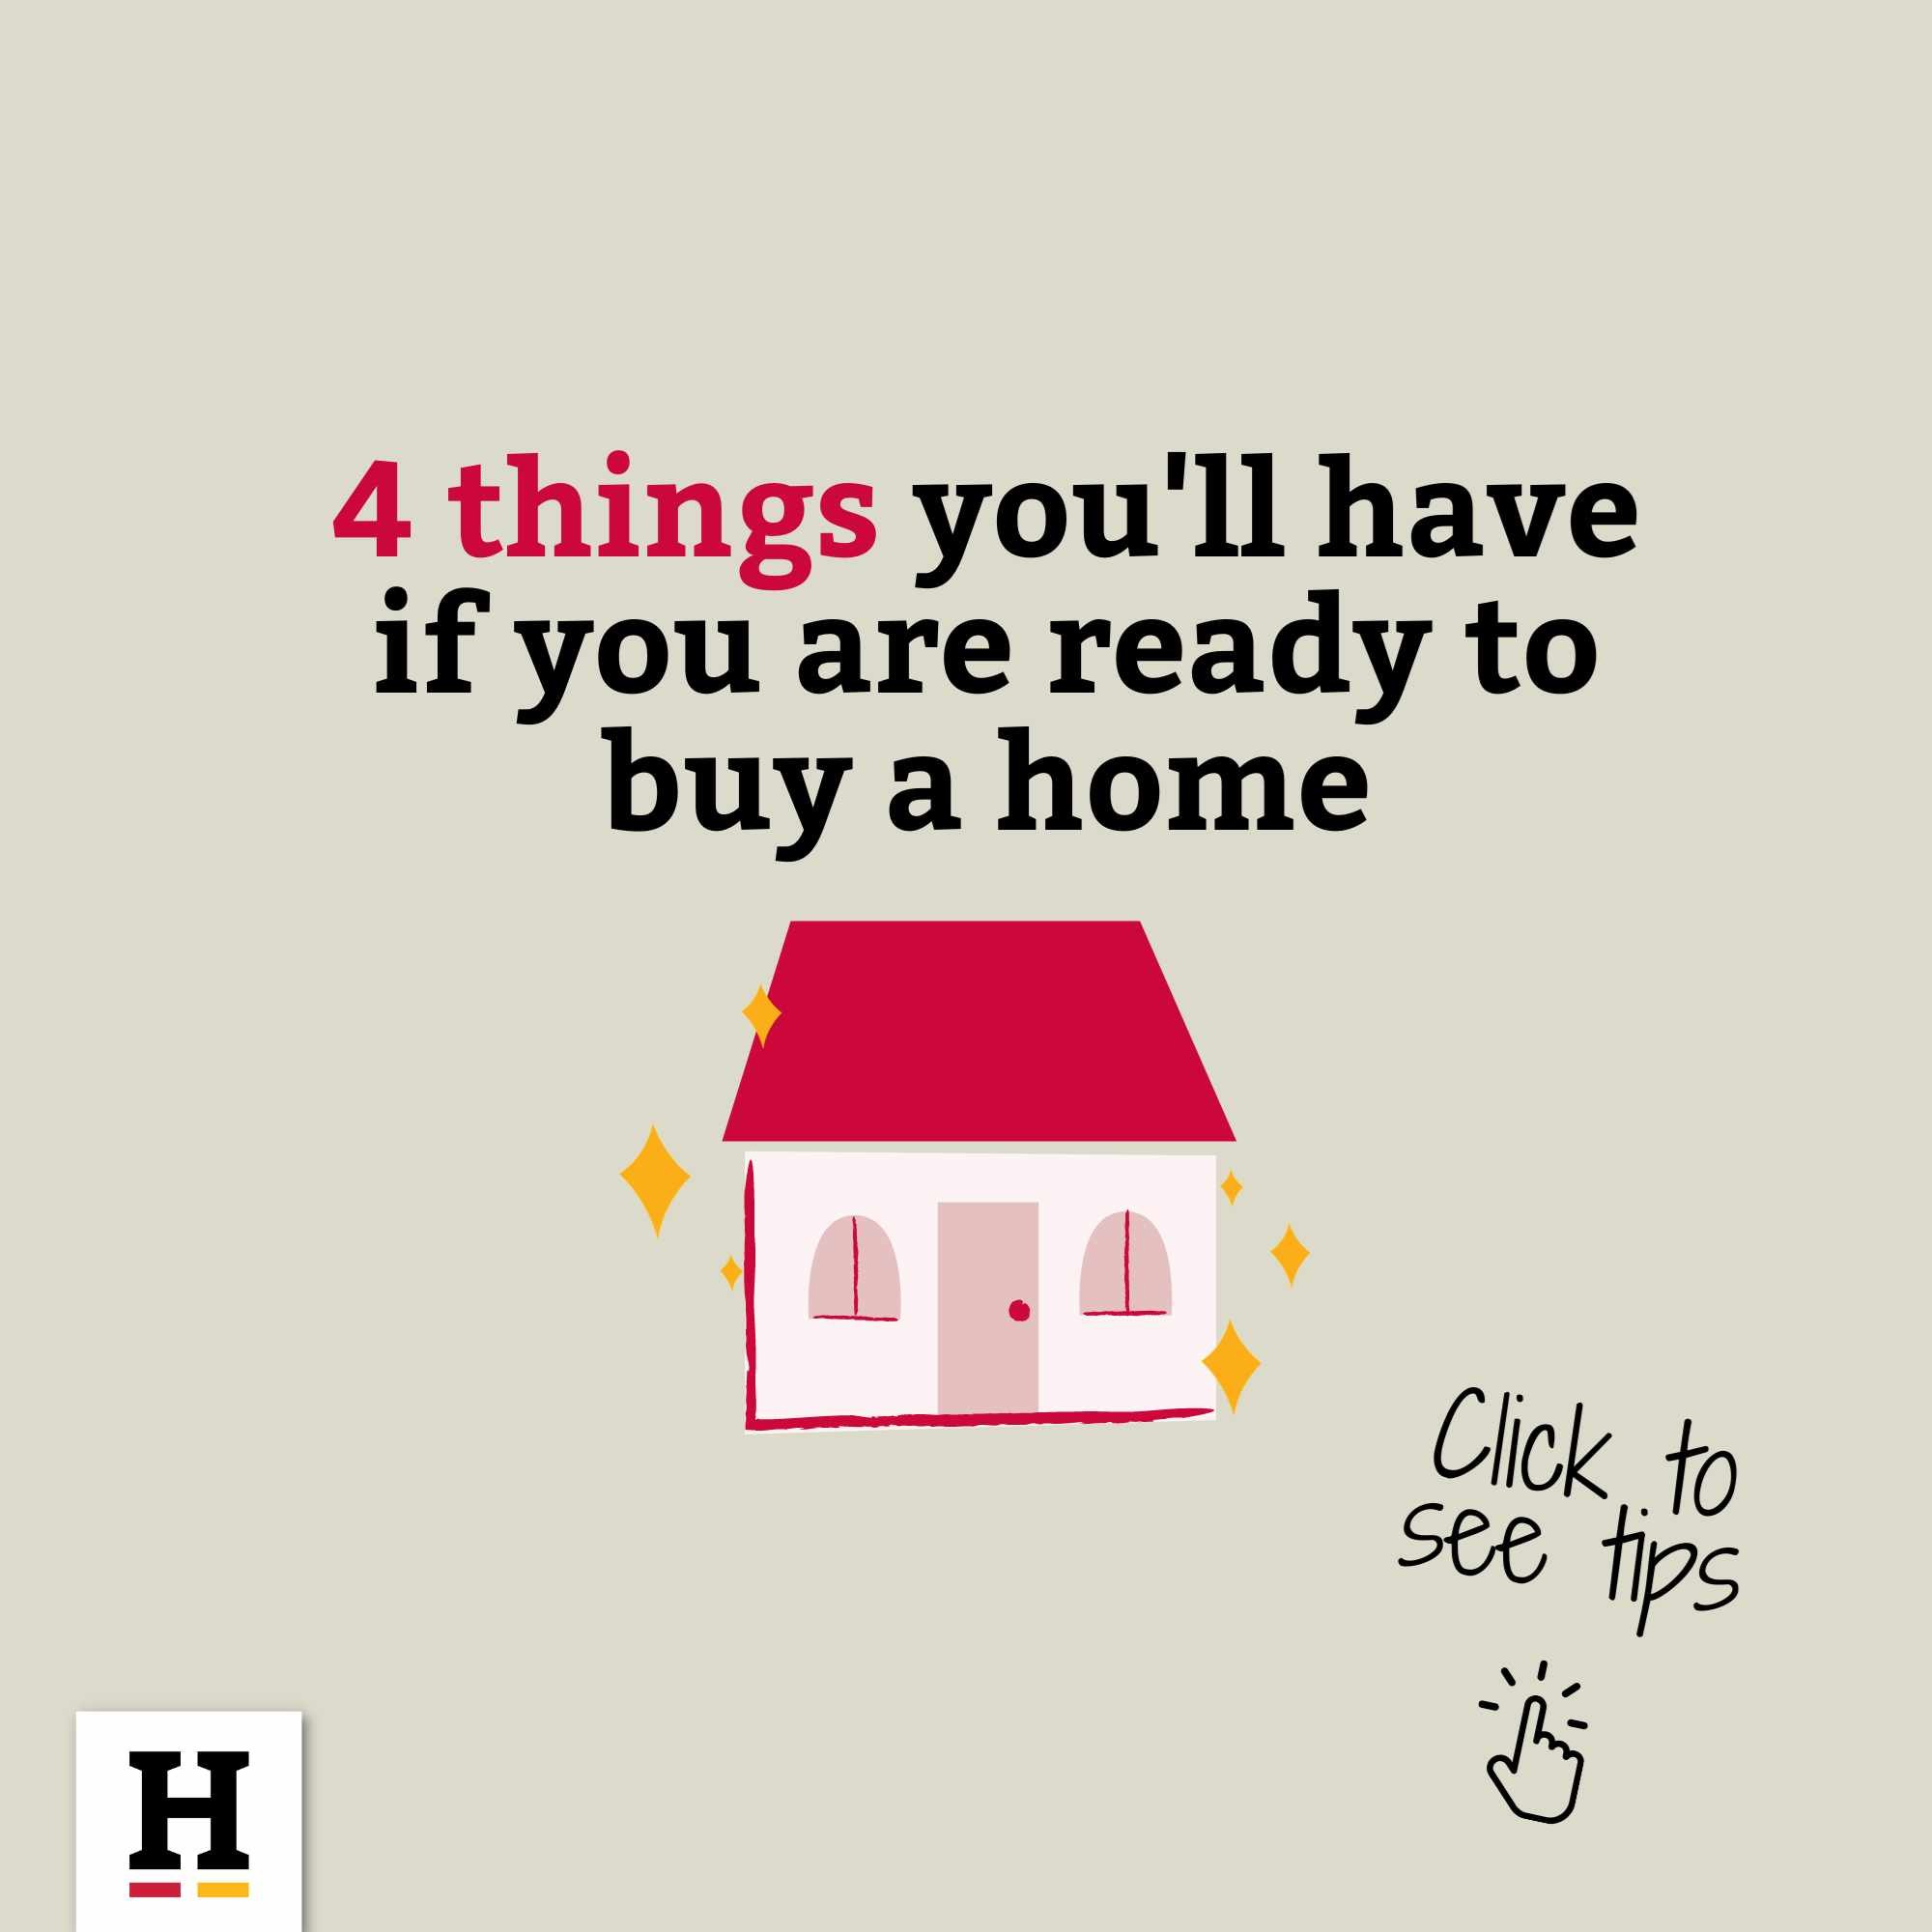 https://www.heritage.com.au/-/media/m/tools/infographics/thumbnails/are-you-ready-to-buy-a-home.jpg?rev=55e24bb03b444602a5de801bb3bb0841&sc_lang=en&cx=0.5&cy=0.5&cw=2000&ch=2000&hash=437AB0177583F04D0224DF575D75097A